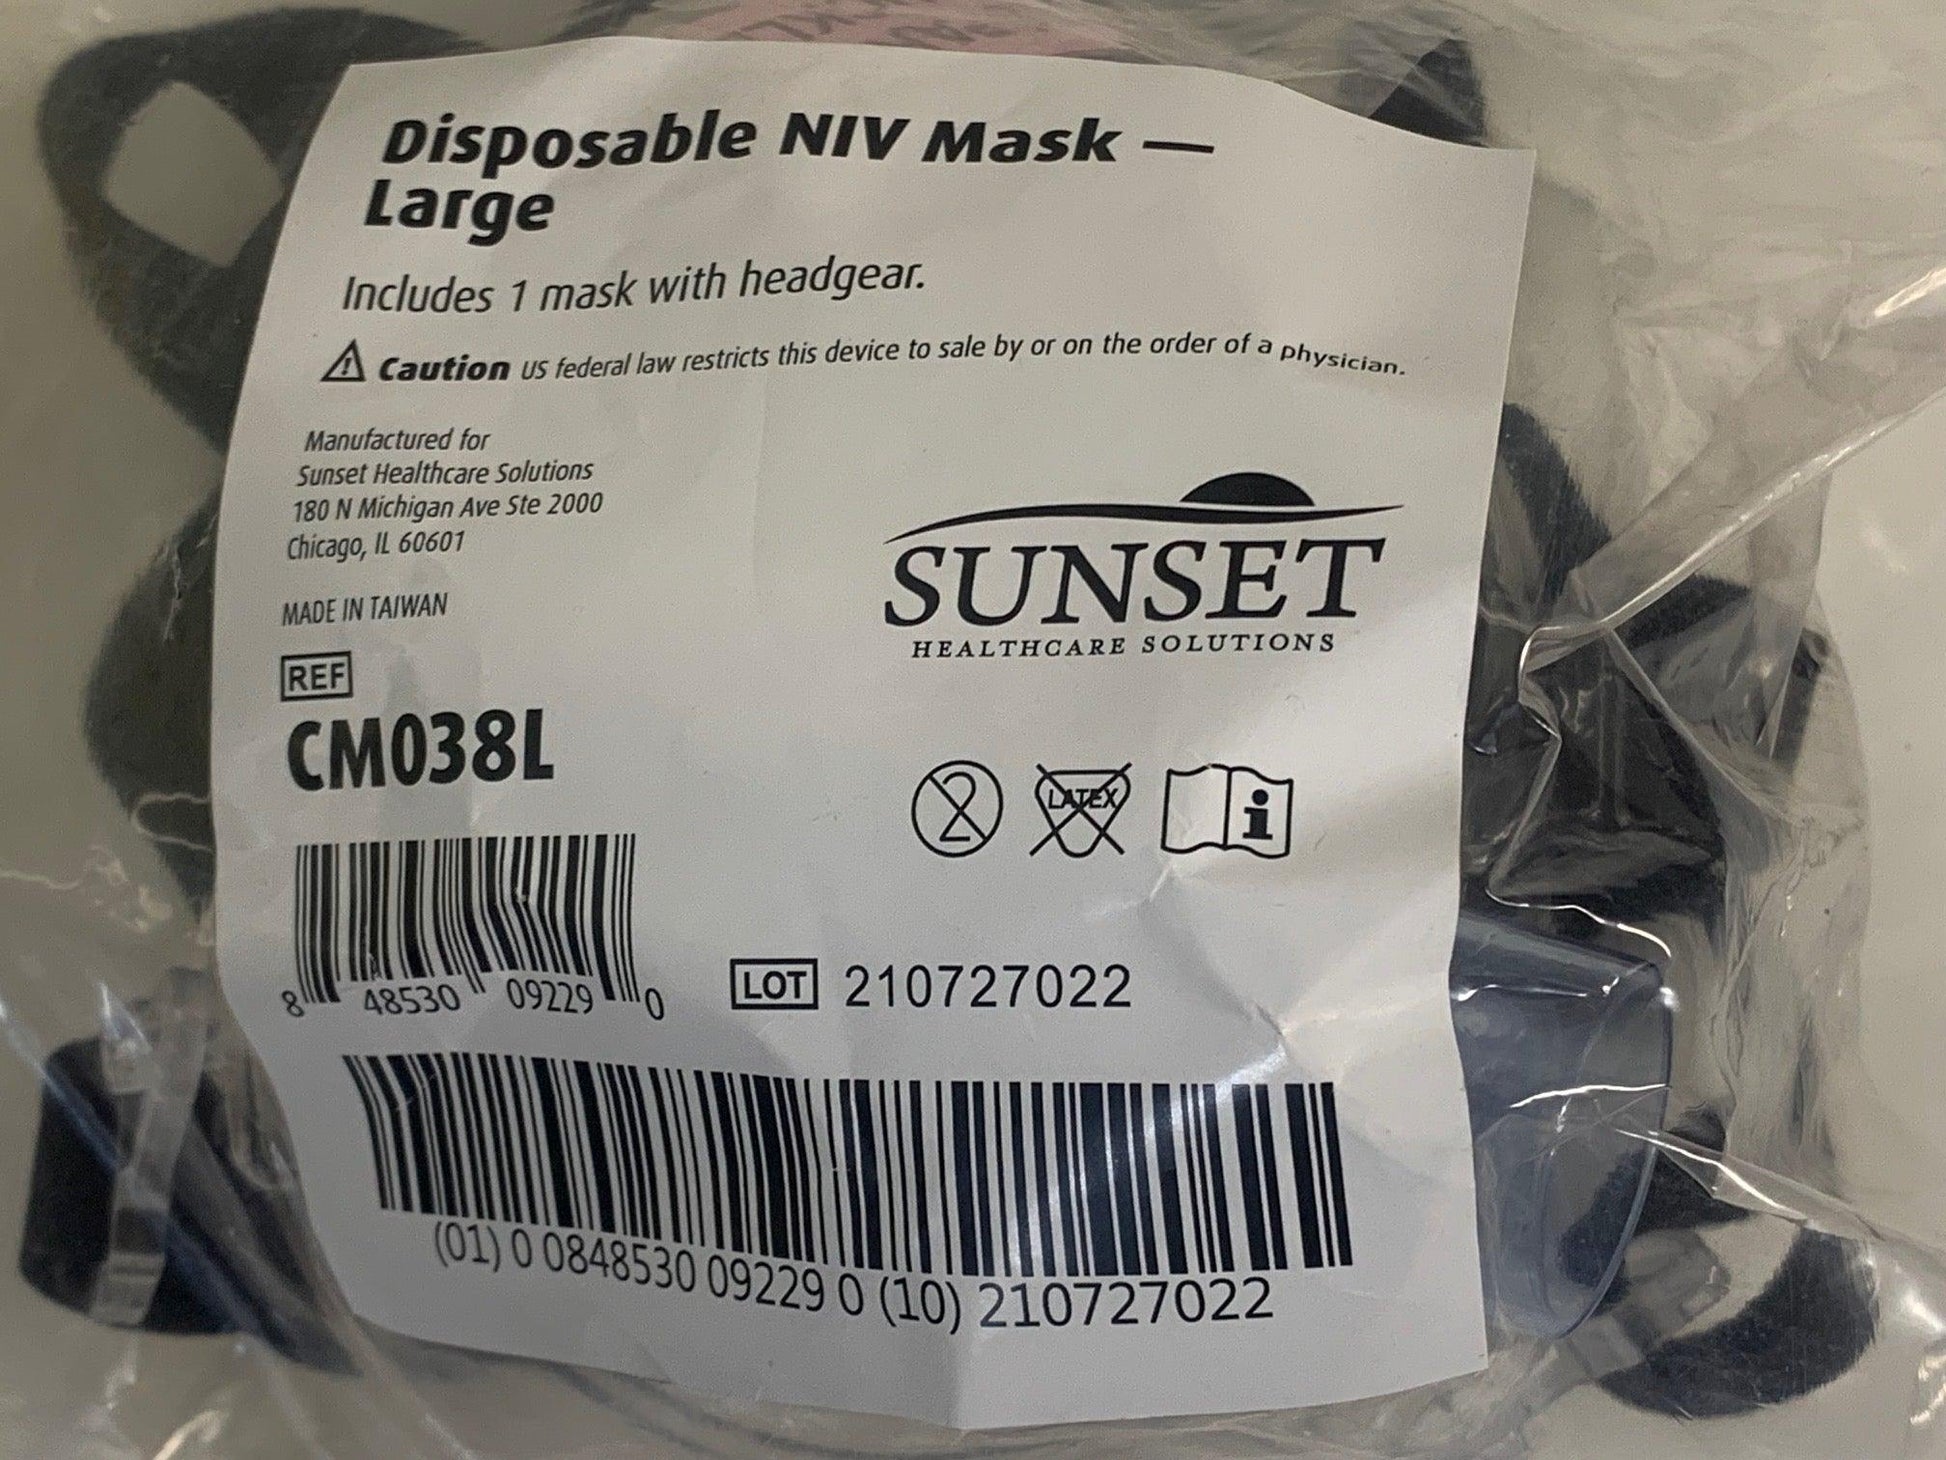 NEW Each Sunset Healthcare Disposable Non-vented NIV Large Mask with Headgear CM038L - MBR Medicals